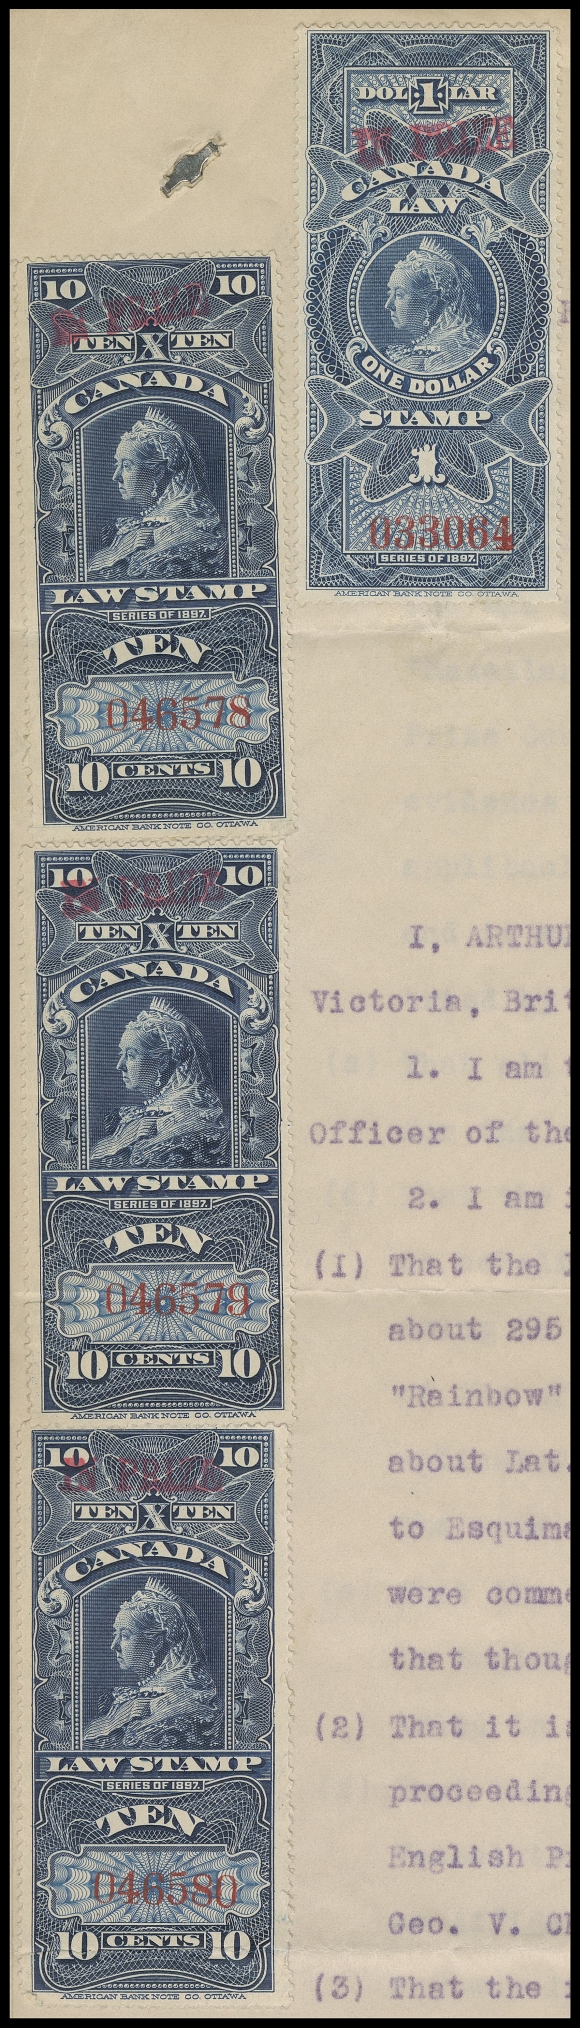 CANADA REVENUES (FEDERAL)  FSC29, 30,An impressive franking consisting of three examples of 10c dark blue, serial numbers "046578", "046579" and "046580" and a single $1 blue ("033064"), all handstamped "IN PRIZE" in red at top; three 10c stamps with light usage folds, the $1 is sound. All quite well centered and affixed uncancelled to first page of "The Leonor" four-page Affidavit of A.P. Luxton document detailing the case against the ship "Leonor", handstamped Exchequer Court IN PRIZE along with manuscript "1 November 16" and initialed. A very rare and most unusual "IN PRIZE" document - very few are franked with the 10 cent Widow Queen "IN PRIZE", F-VF (Cat. $3,800 is for stamps alone)